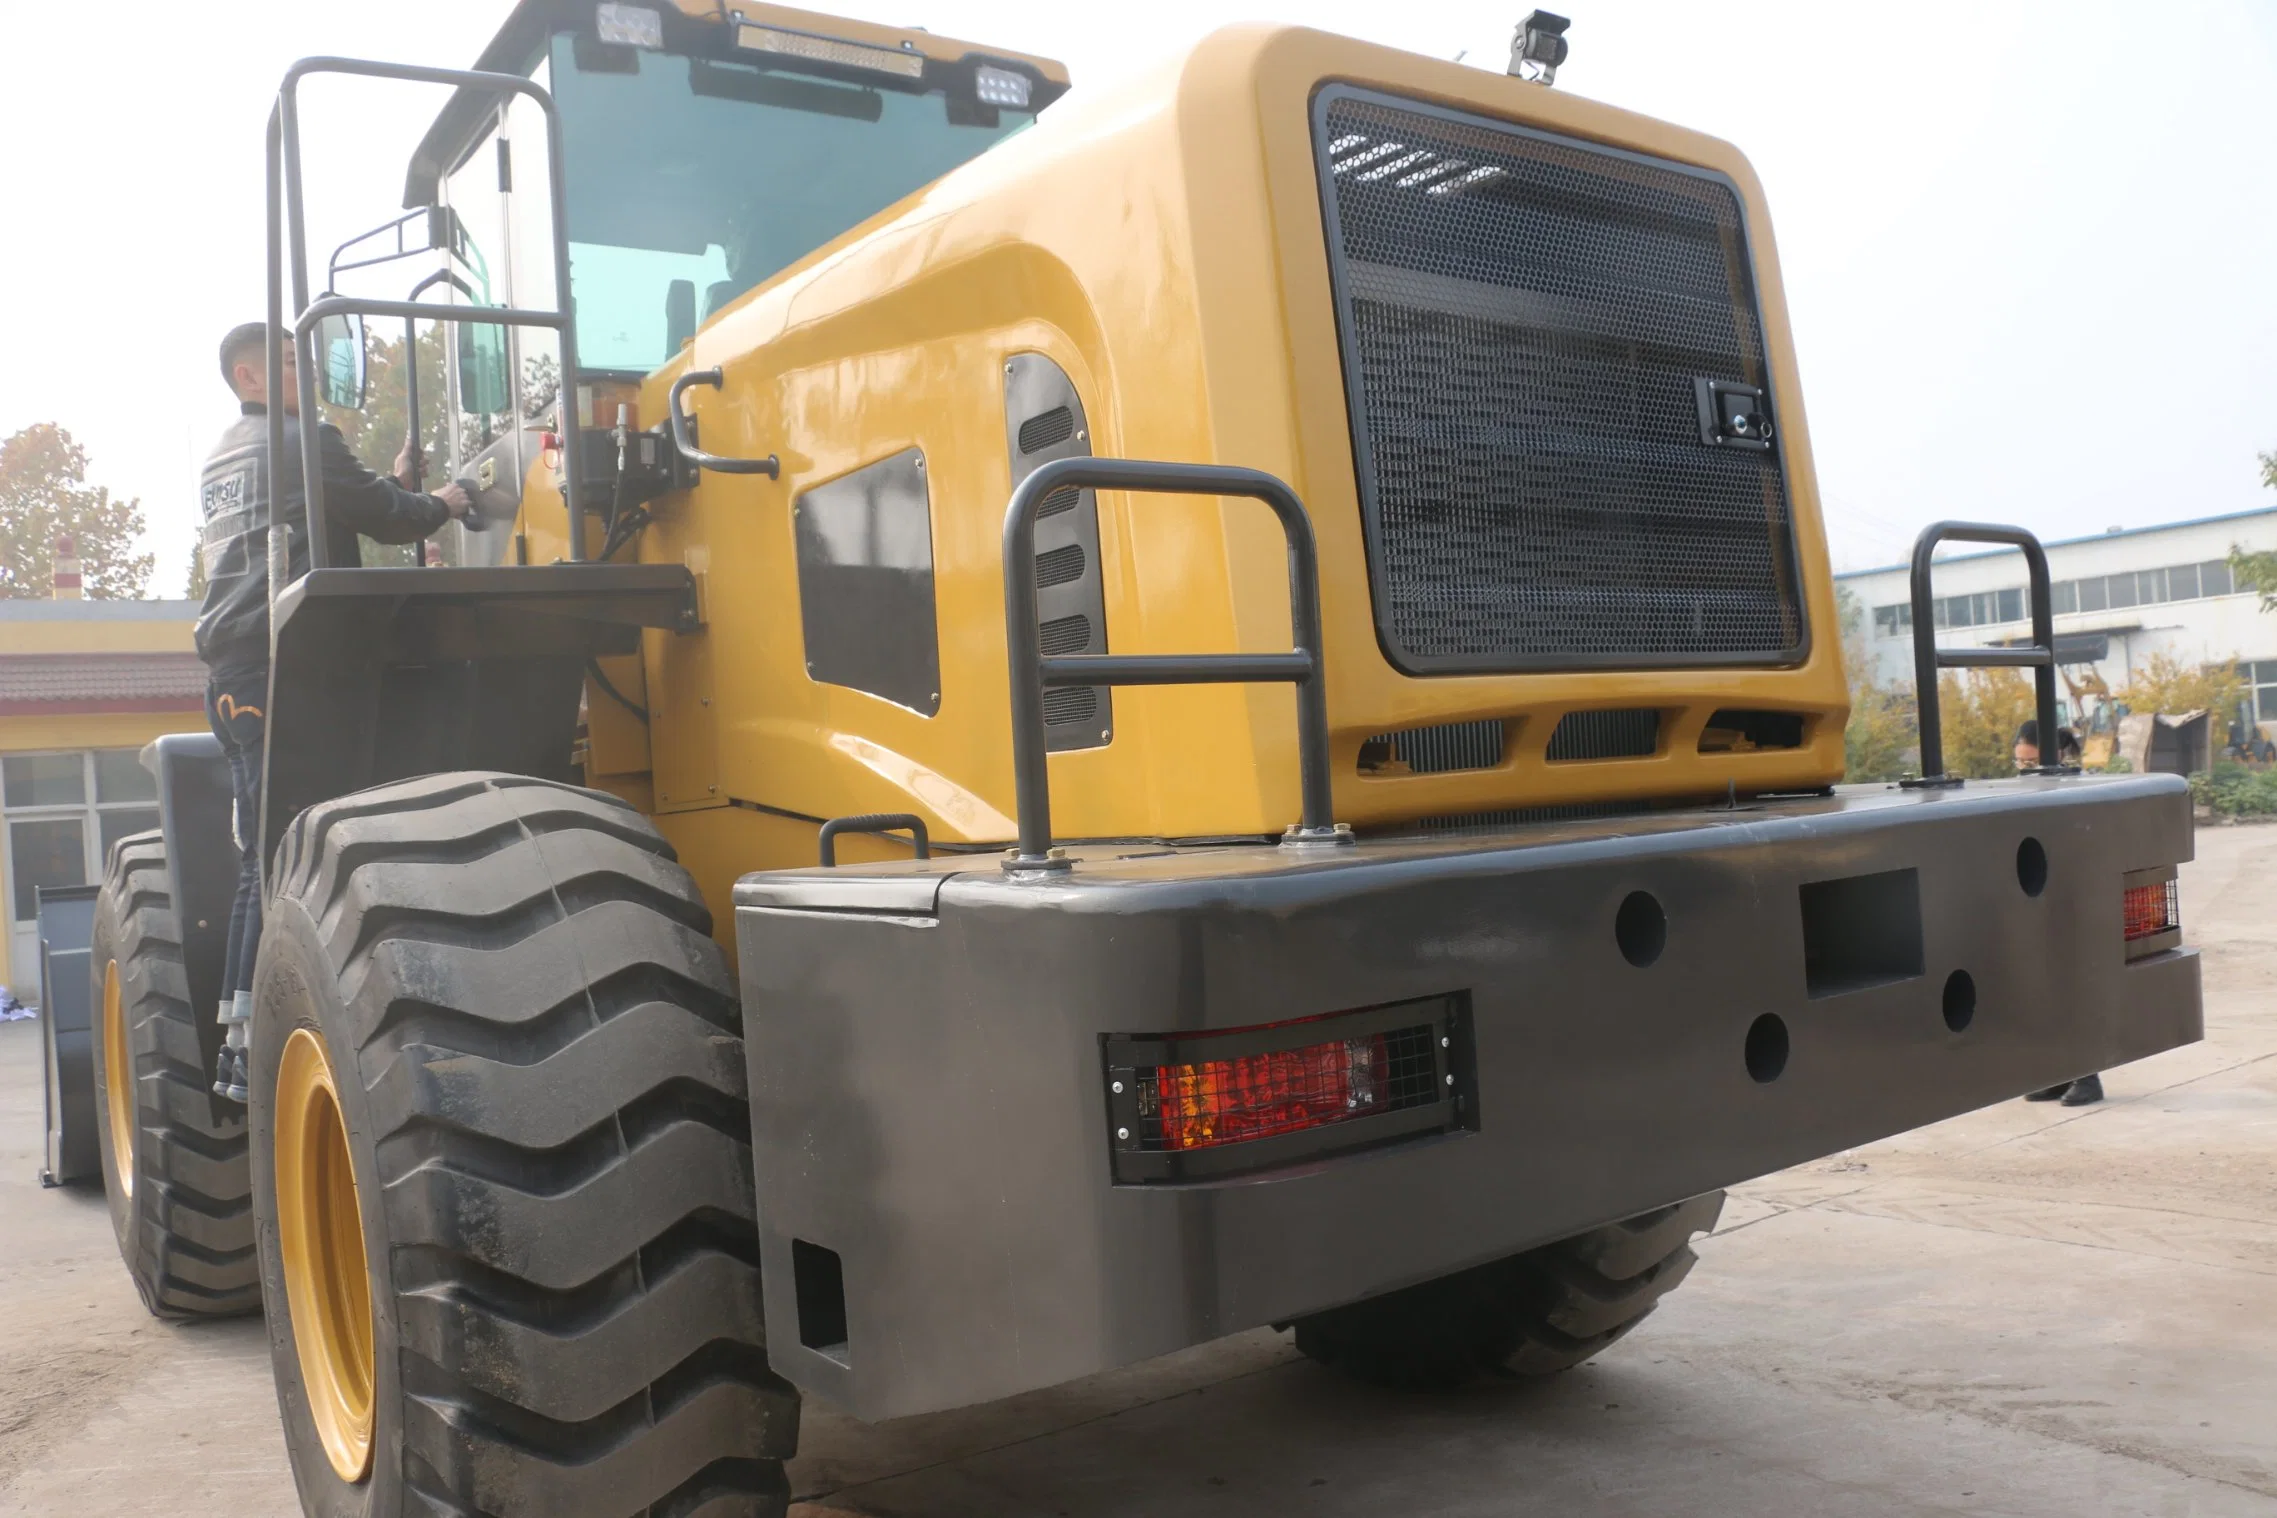 China Manufacture 5ton Lq956 with Attachments Loader